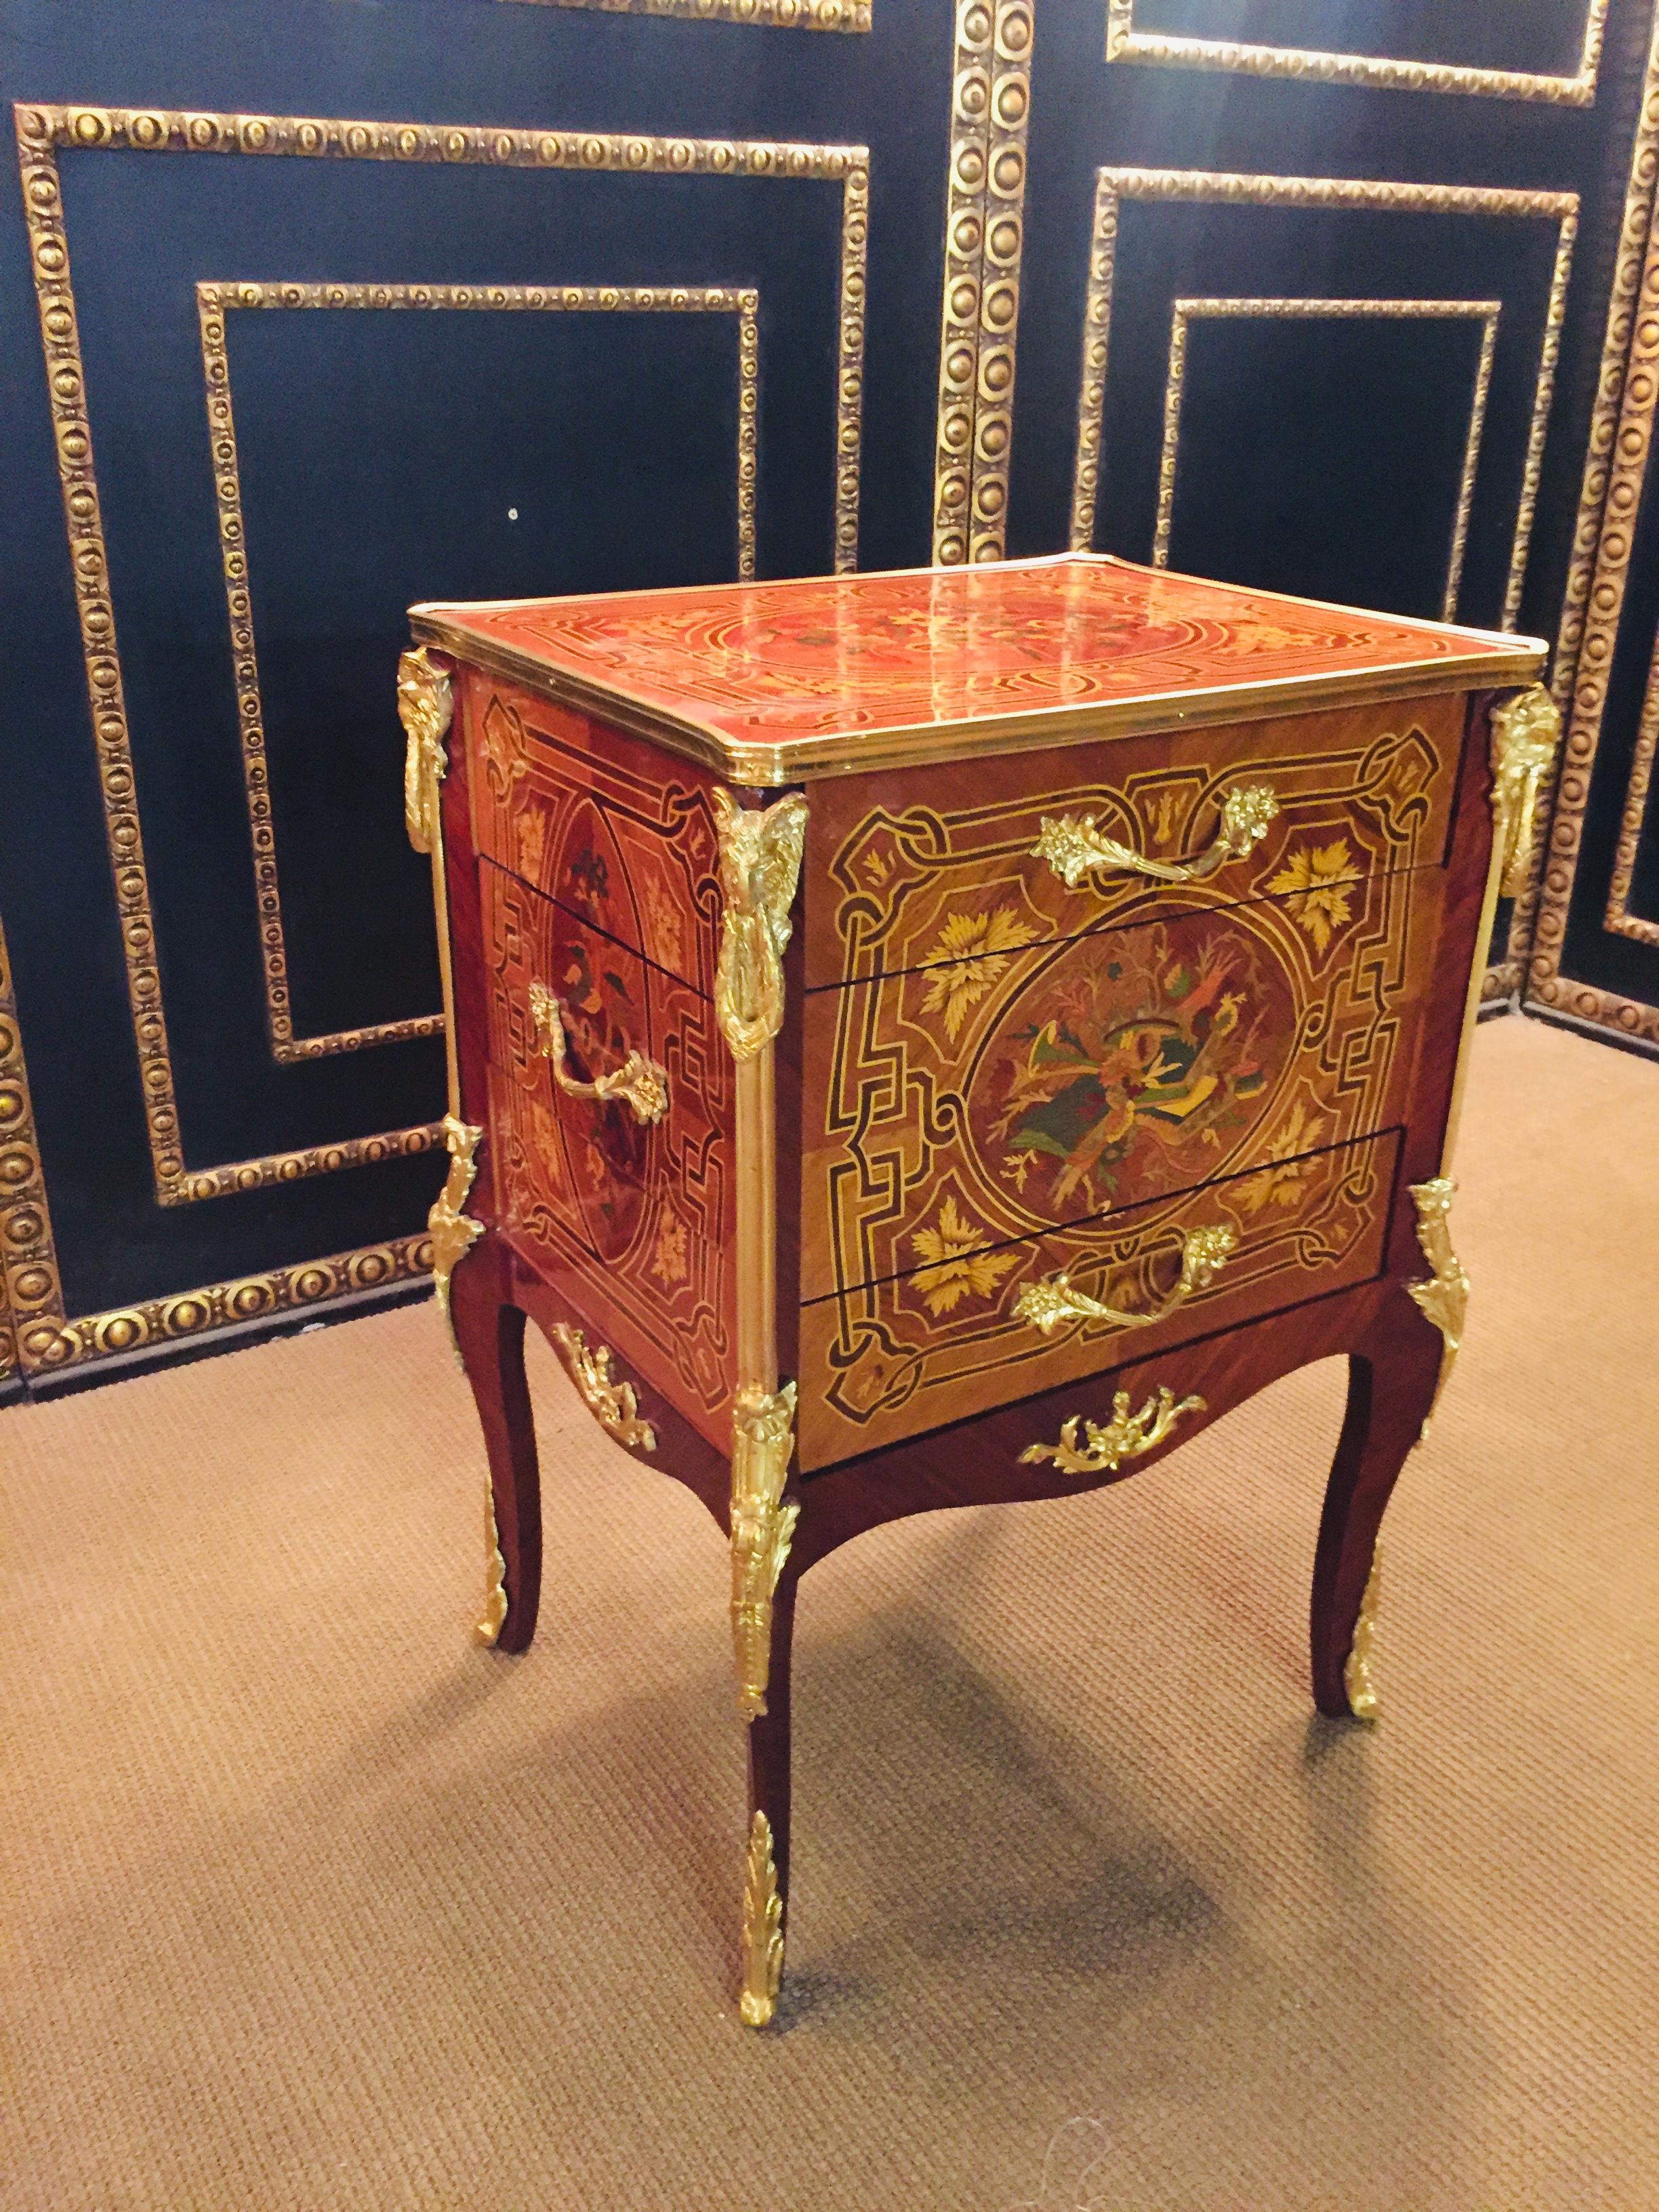 20th Century Antique Louis XVI Style Commode or Chest of Drawers Mahogany Veneer In Good Condition For Sale In Berlin, DE